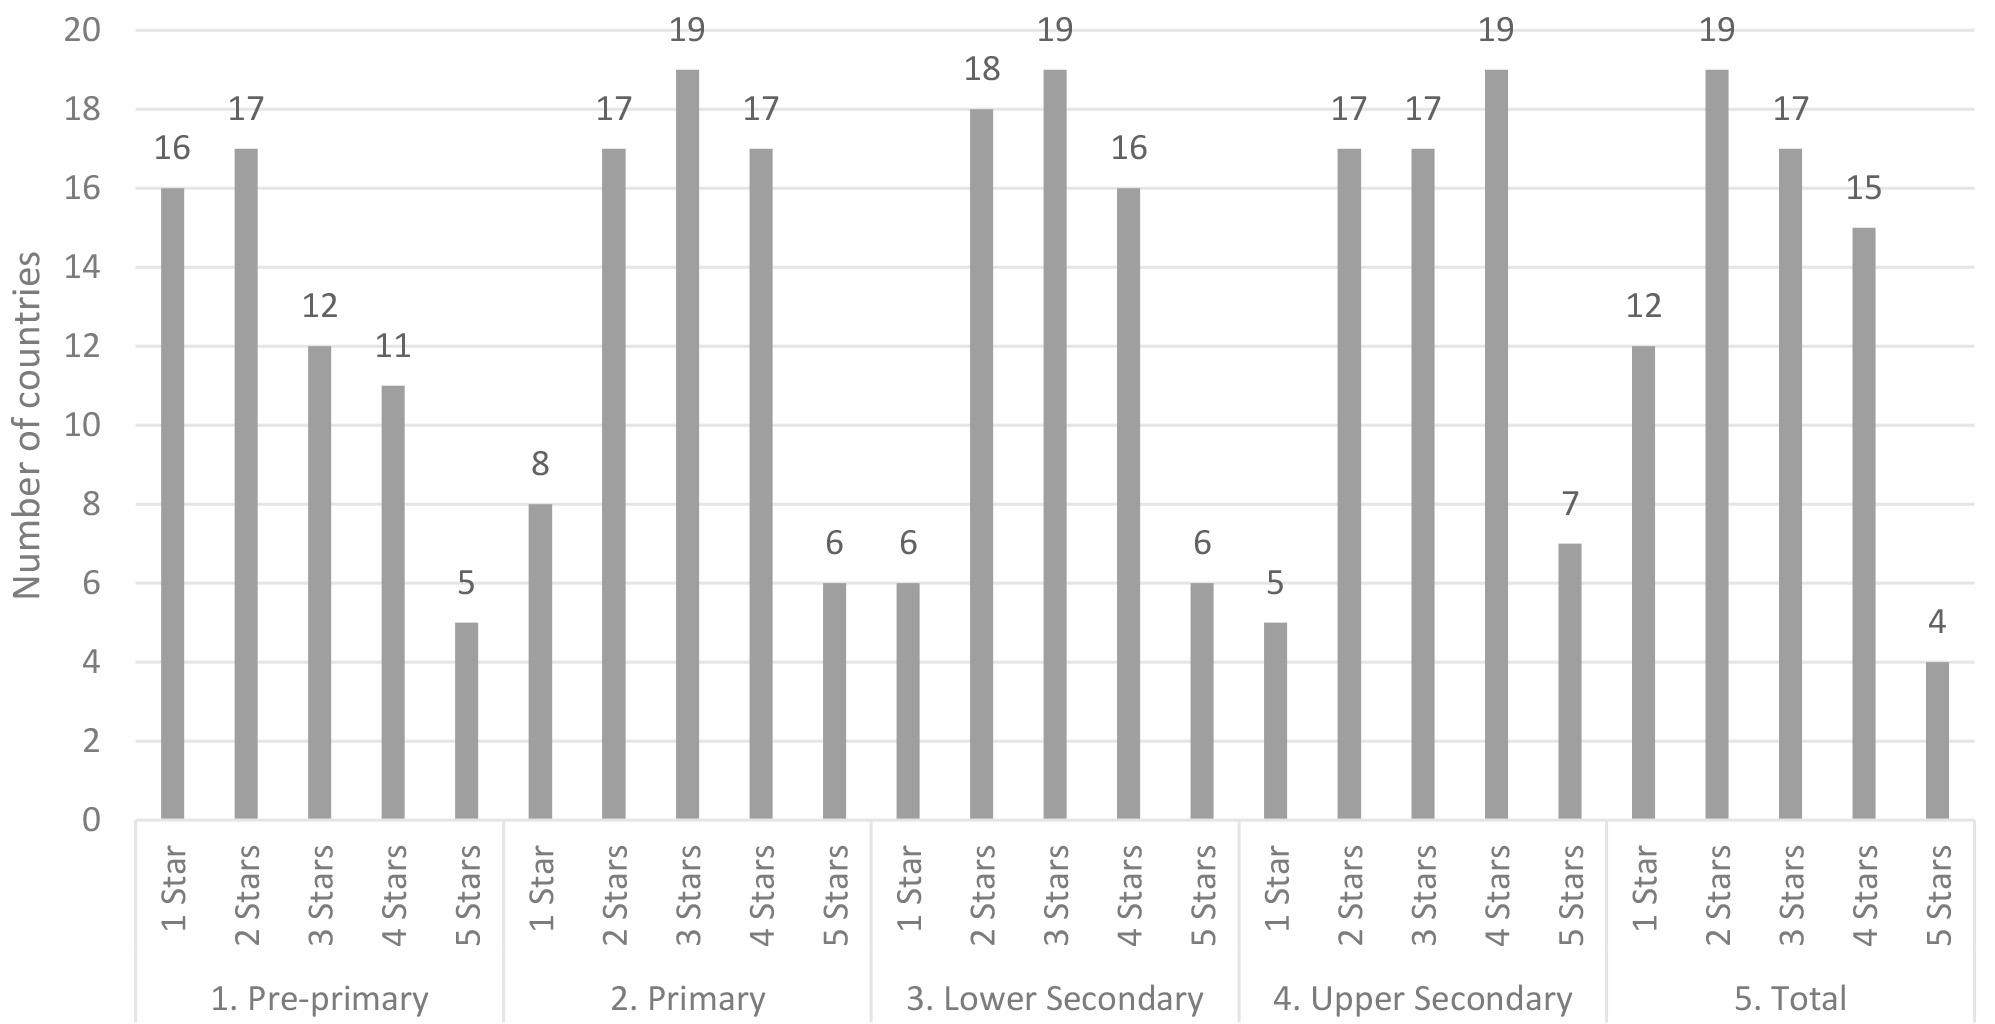 RLRI by level of education (global overview)1. Source: Authors’ calculations based on Multiple Indicator Cluster Surveys (2010–2020) and Demographic and Health Surveys (2010–2020), the first round of the UNESCO-UNICEF-World Bank Survey on National Education Responses to COVID-19 School Closures, May–June 2020, and UNICEF Strategic Monitoring Questions, December 2020.